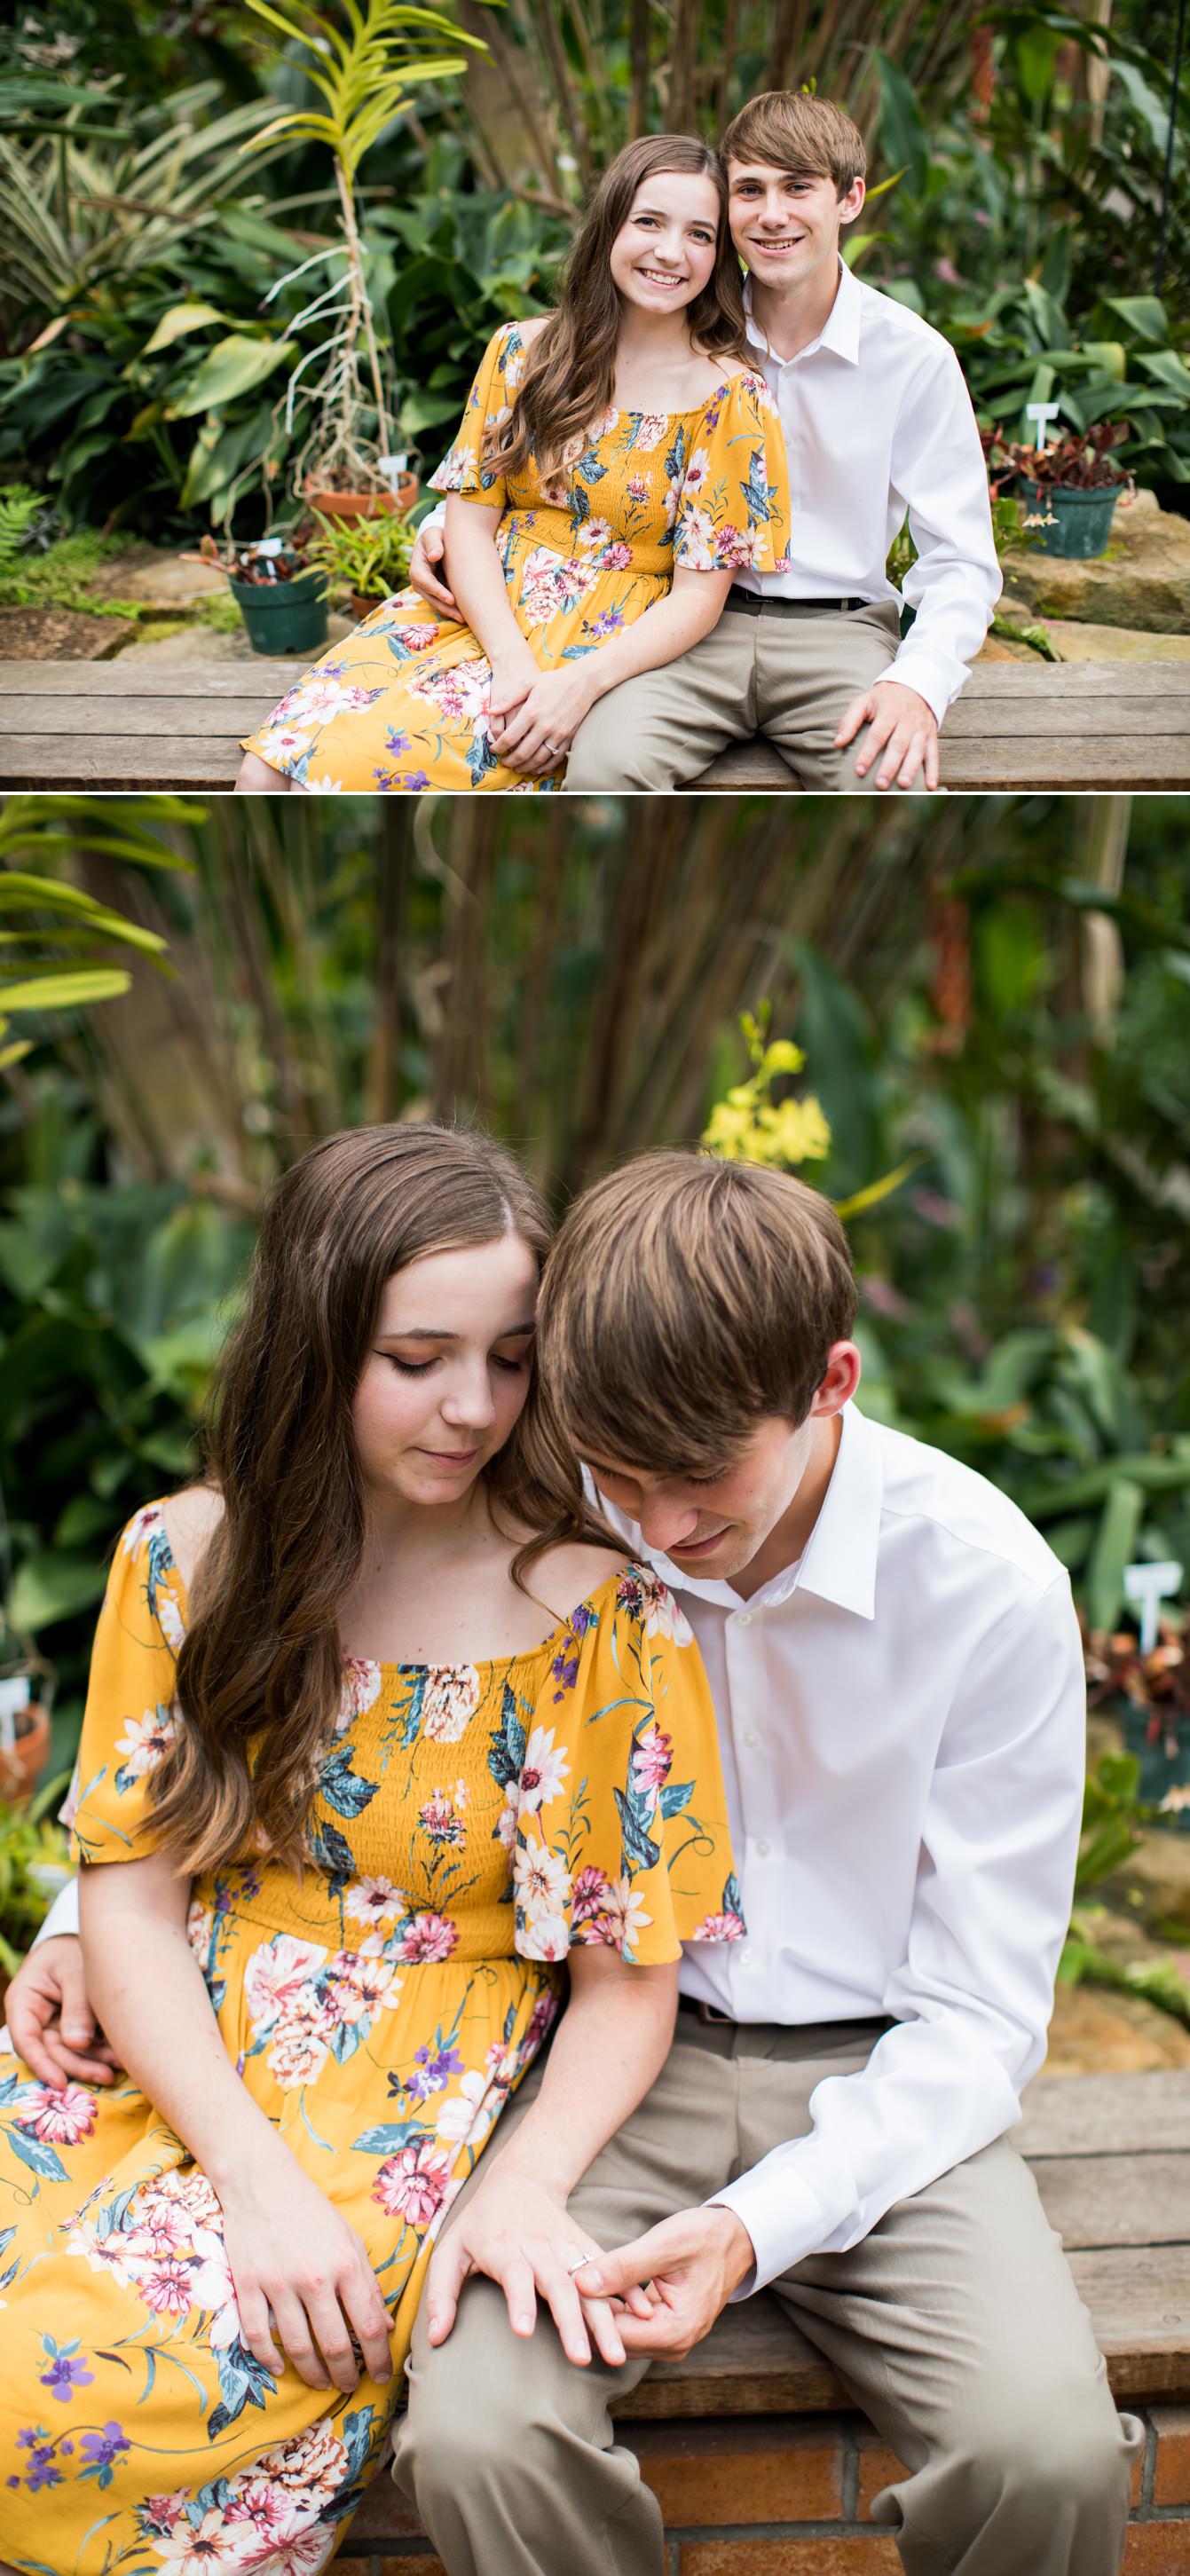 Guy and girl sitting together at an engagement session at Matthaei Botanical Gardens in Ann Arbor, Michigan